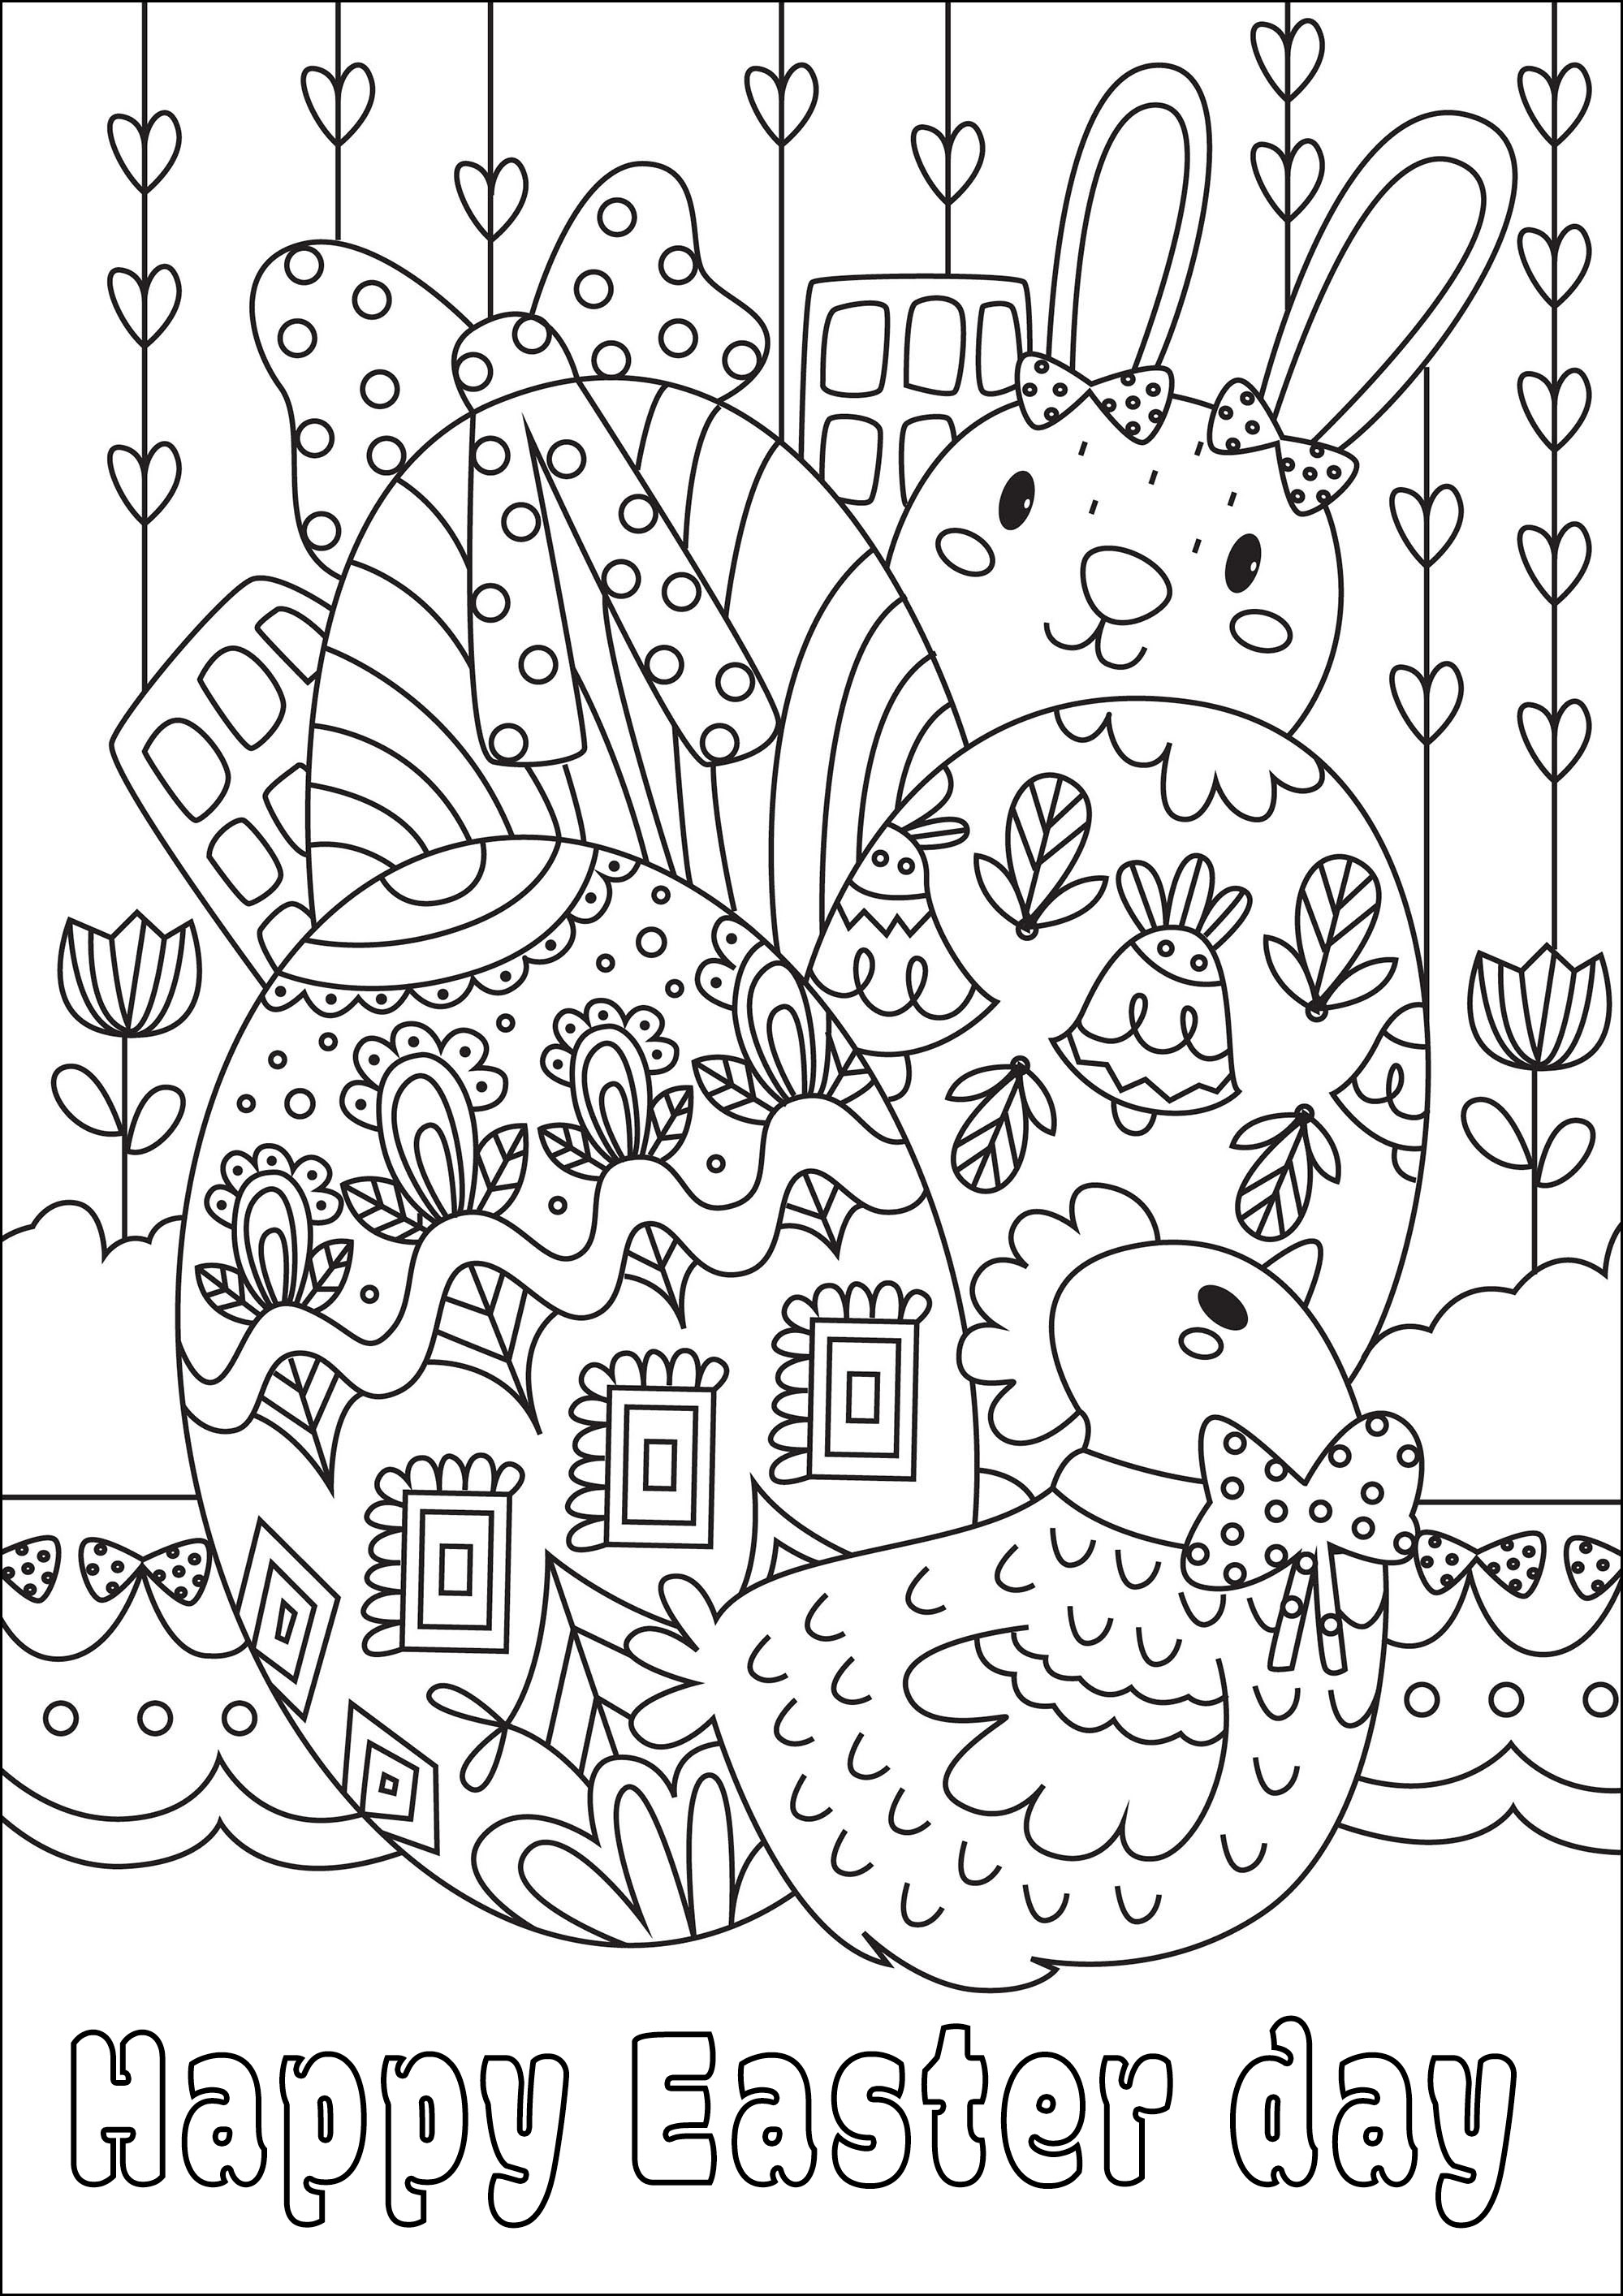 Easter coloring. A beautiful coloring page with pretty eggs, a rabbit and a hen, Artist : Gaelle Picard